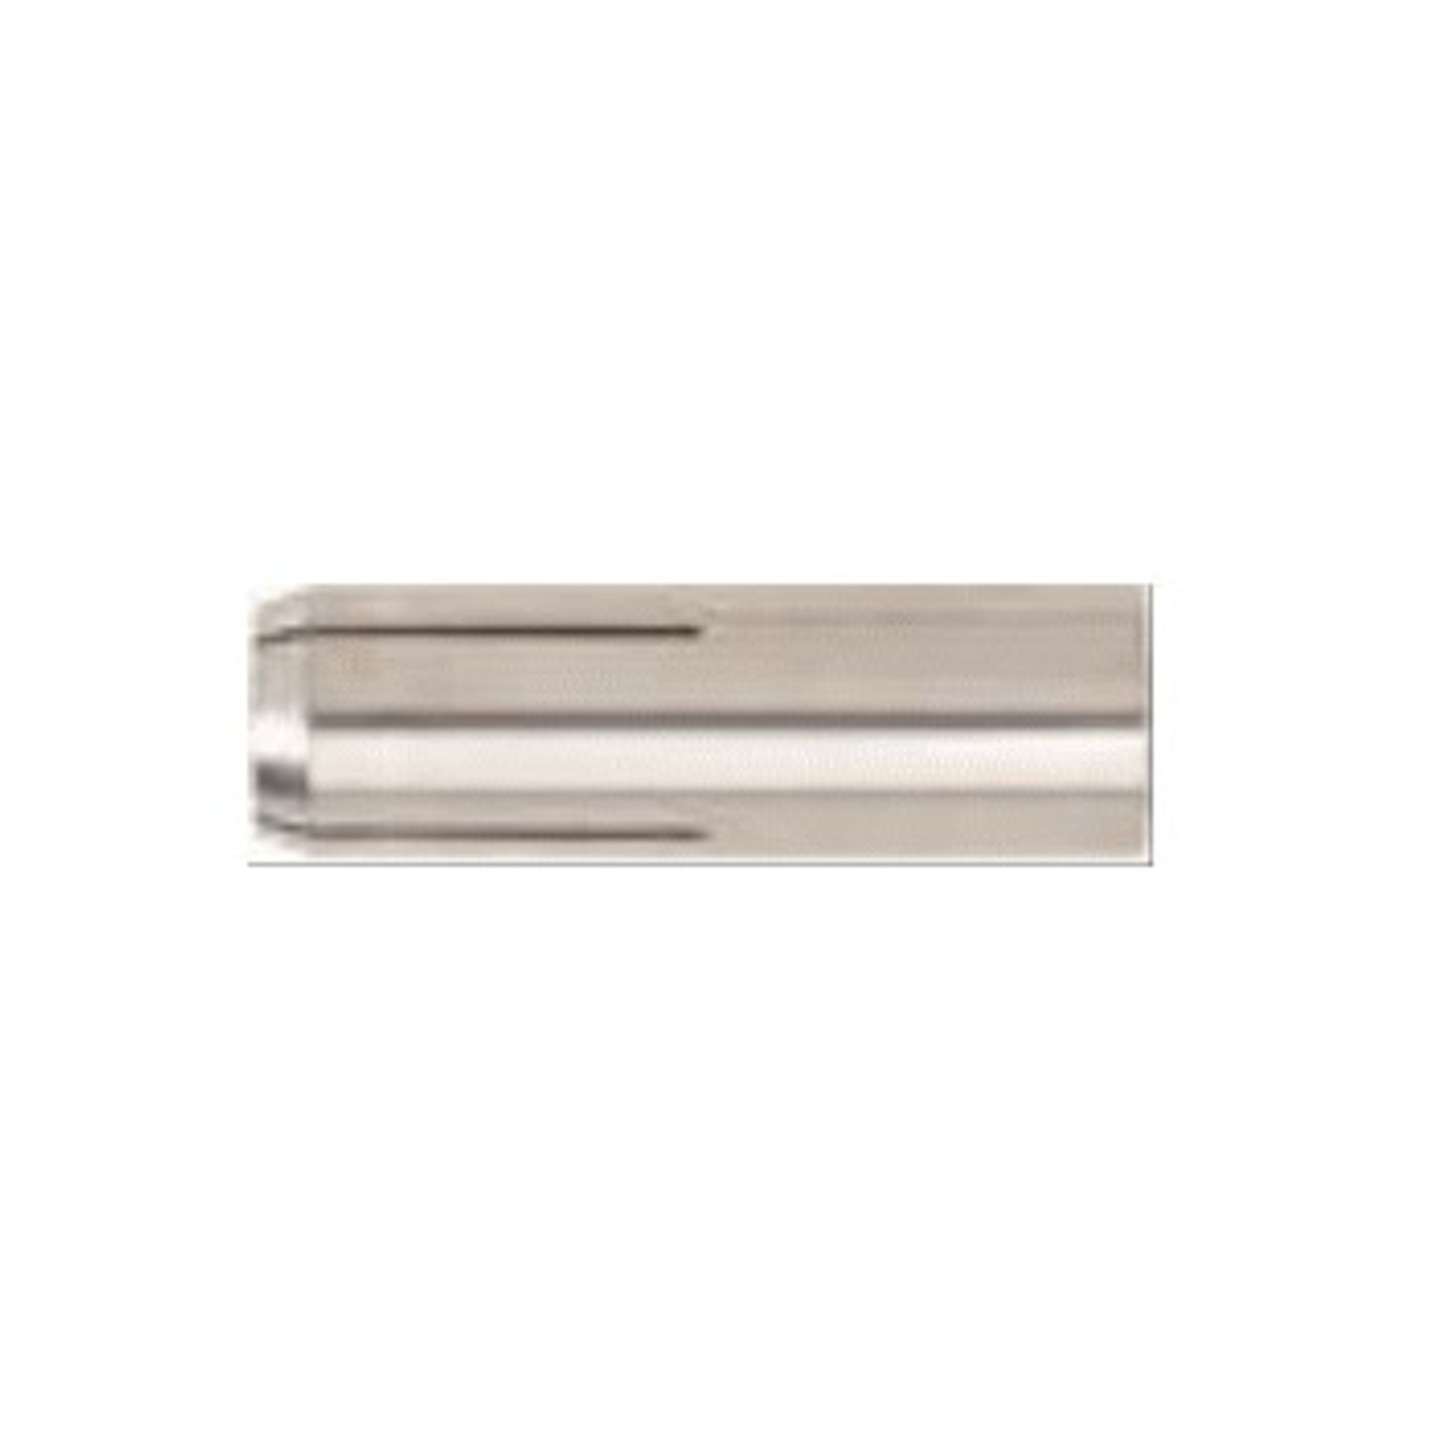 INDEX HE-A4 Stainless Steel Drop-In Anchor For Non-Cracked Concrete - ETA VERSION OPTION 7